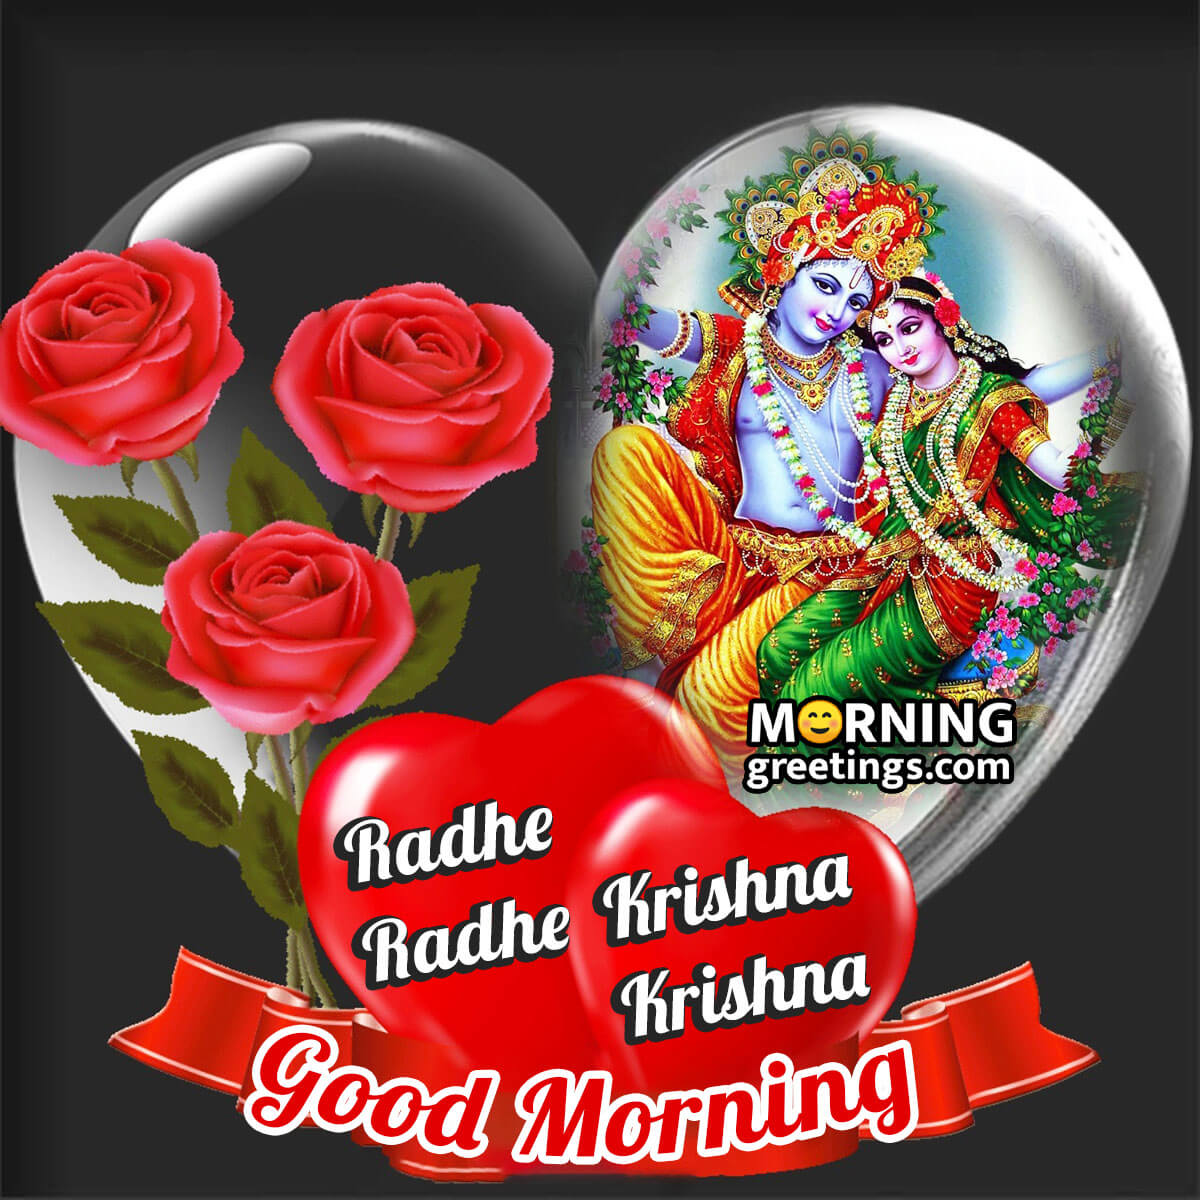 Good Morning Radha Krishna Images With Quotes